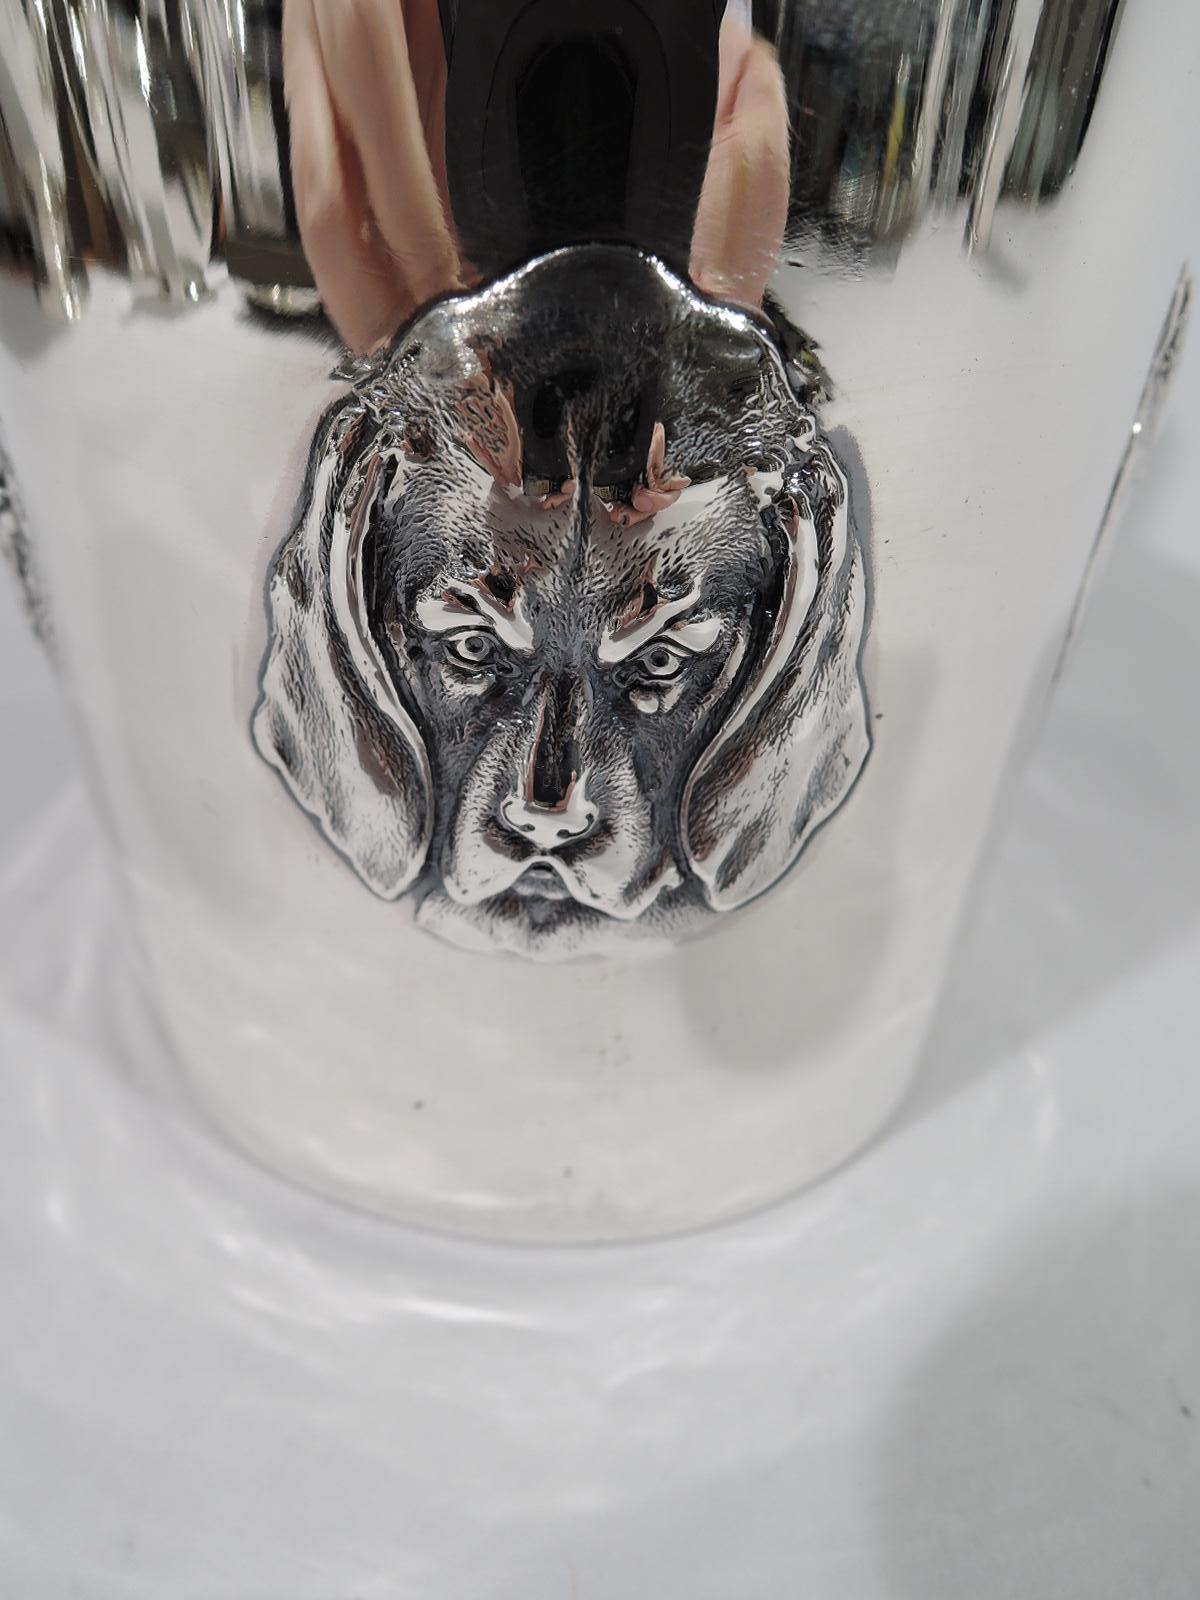 Fido Mug, Antique Gorham Sterling Silver Baby Cup with Canine Medley 2